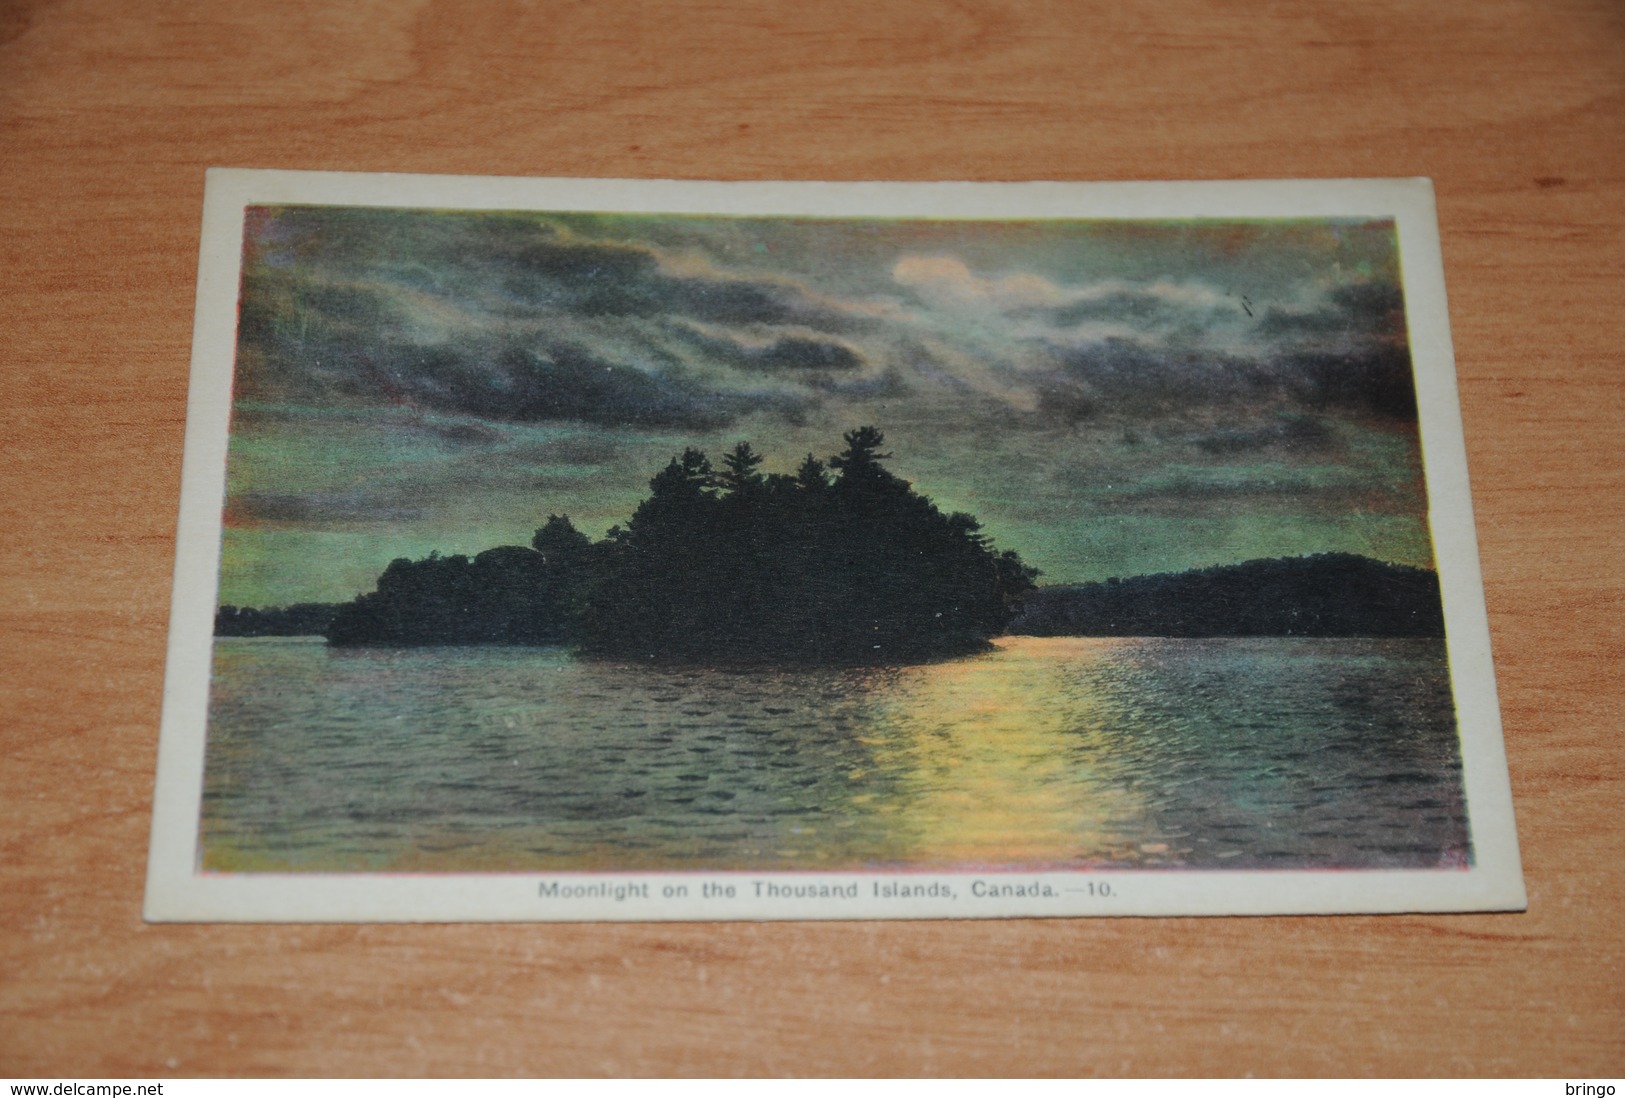 3054-           CANADA, ONTARIO, MOONLIGHT ON THE THOUSAND ISLANDS - Thousand Islands